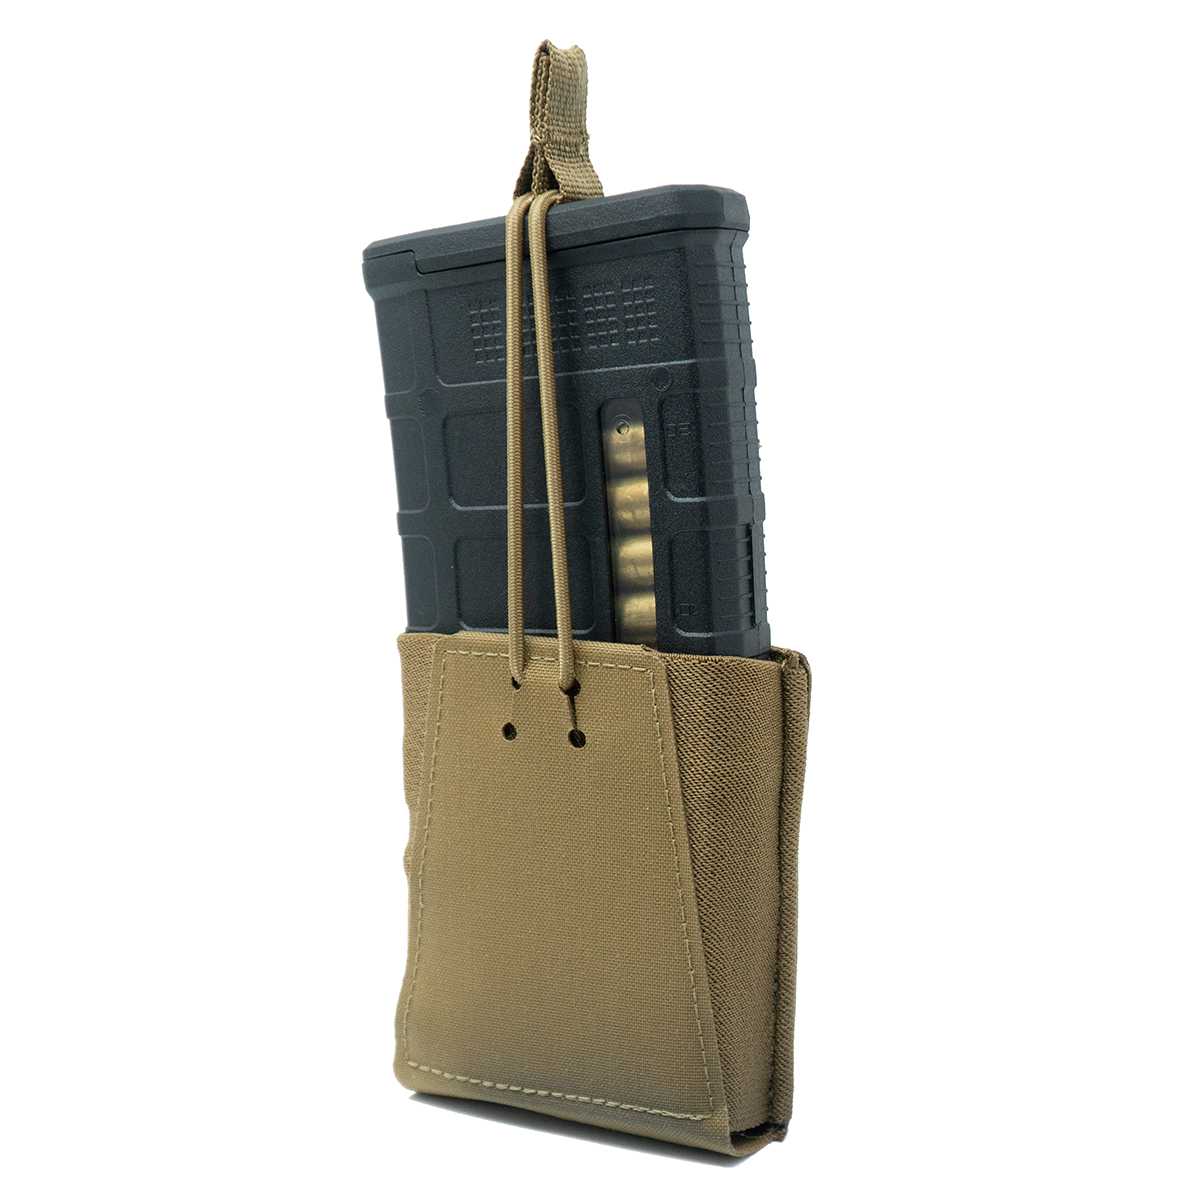 GBRS GROUP Single Rifle Magazine Pouch 7.62